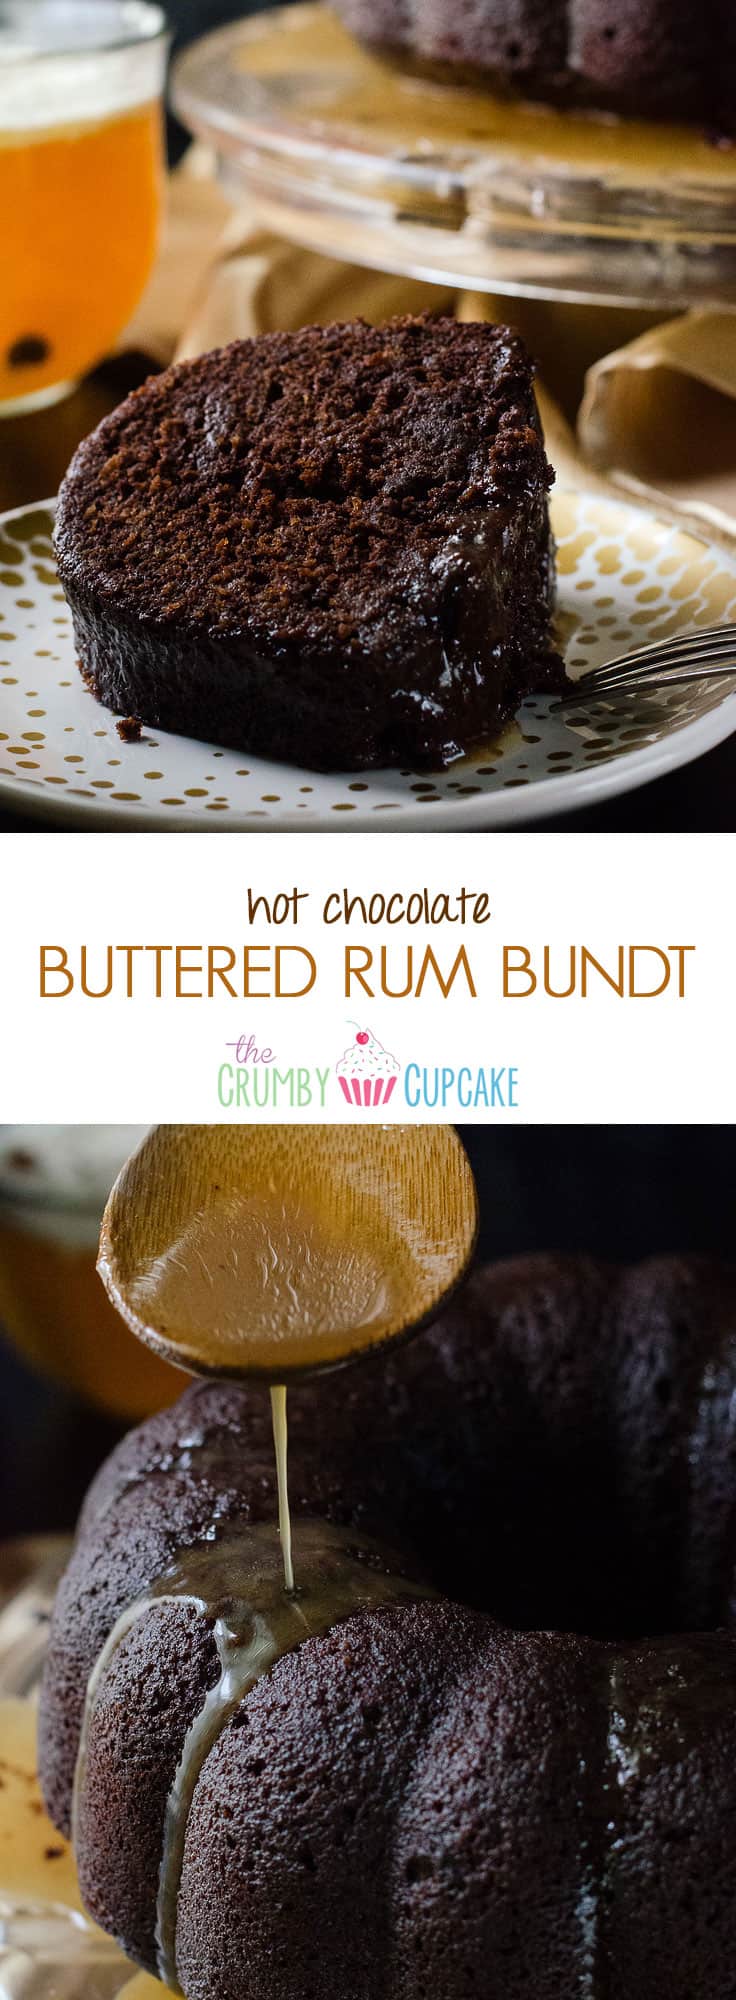 Hot Chocolate Buttered Rum Bundt | This dense chocolate cake is spiced and flavored like a mug of Hot Buttered Rum, then doused in a butter rum glaze - it's the ultimate boozy bundt!